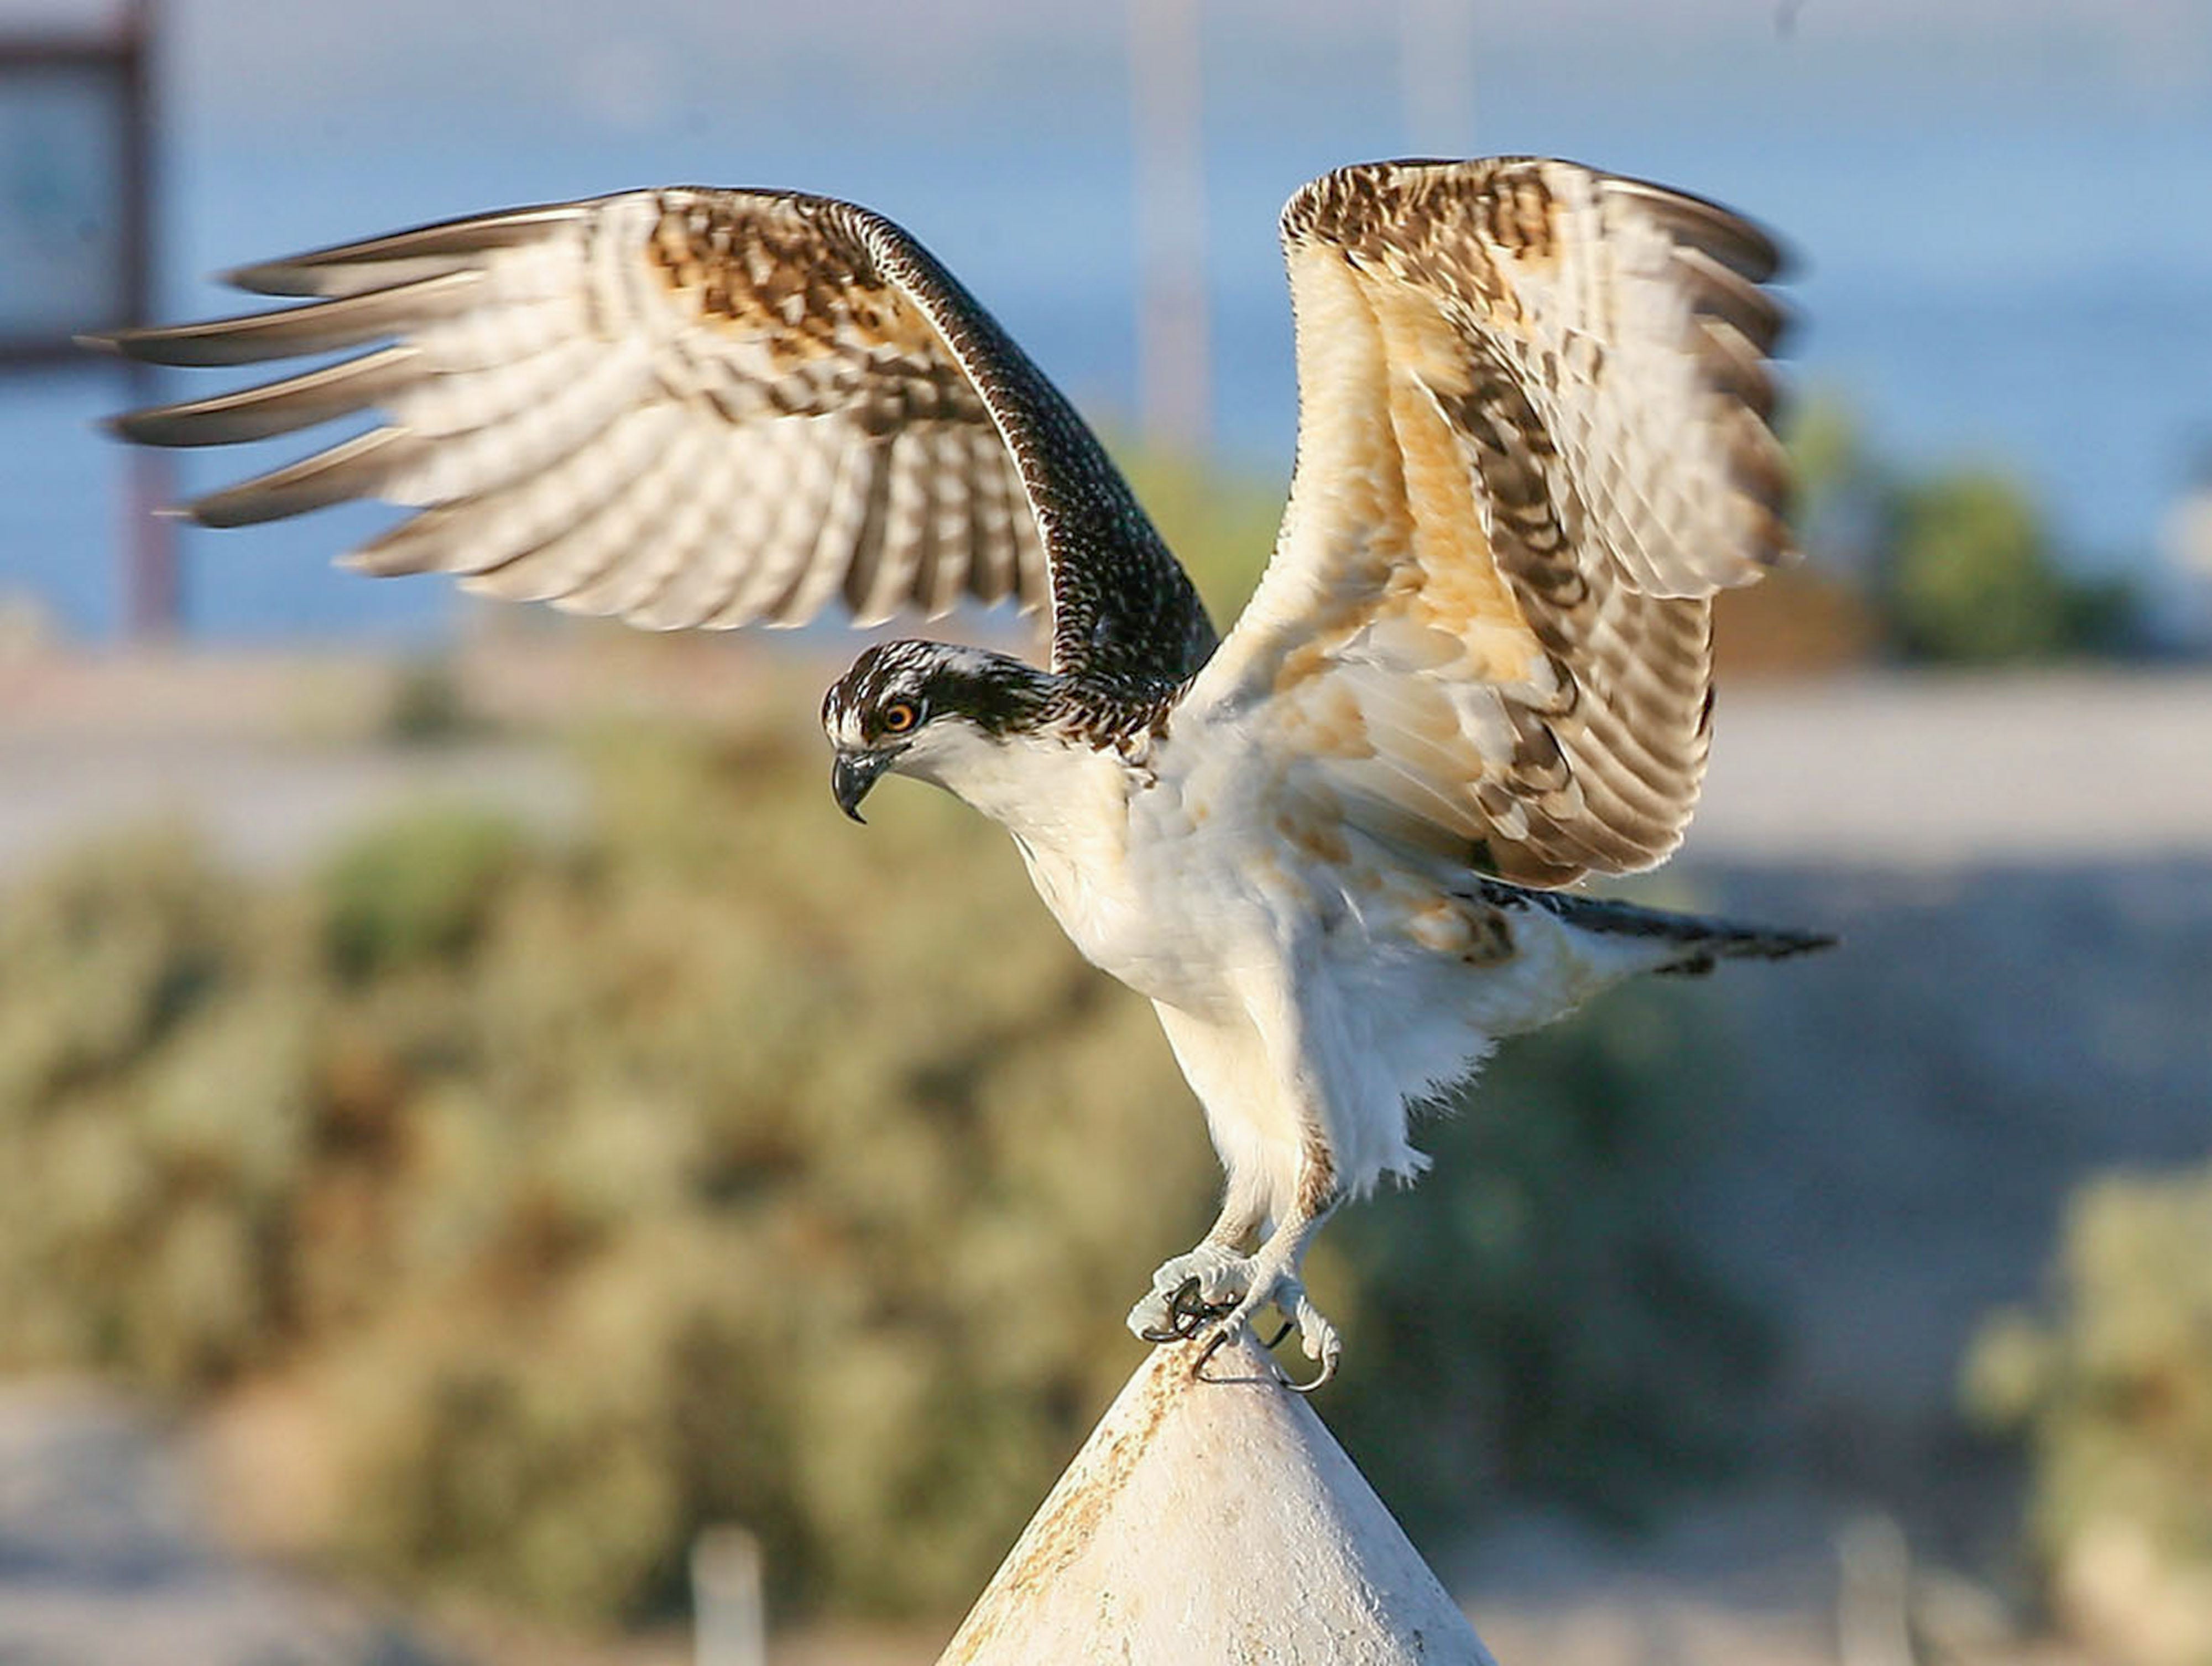 An osprey spreads its wings at Varnor Harbor at the Salton Sea State Recreation Area in 2012.